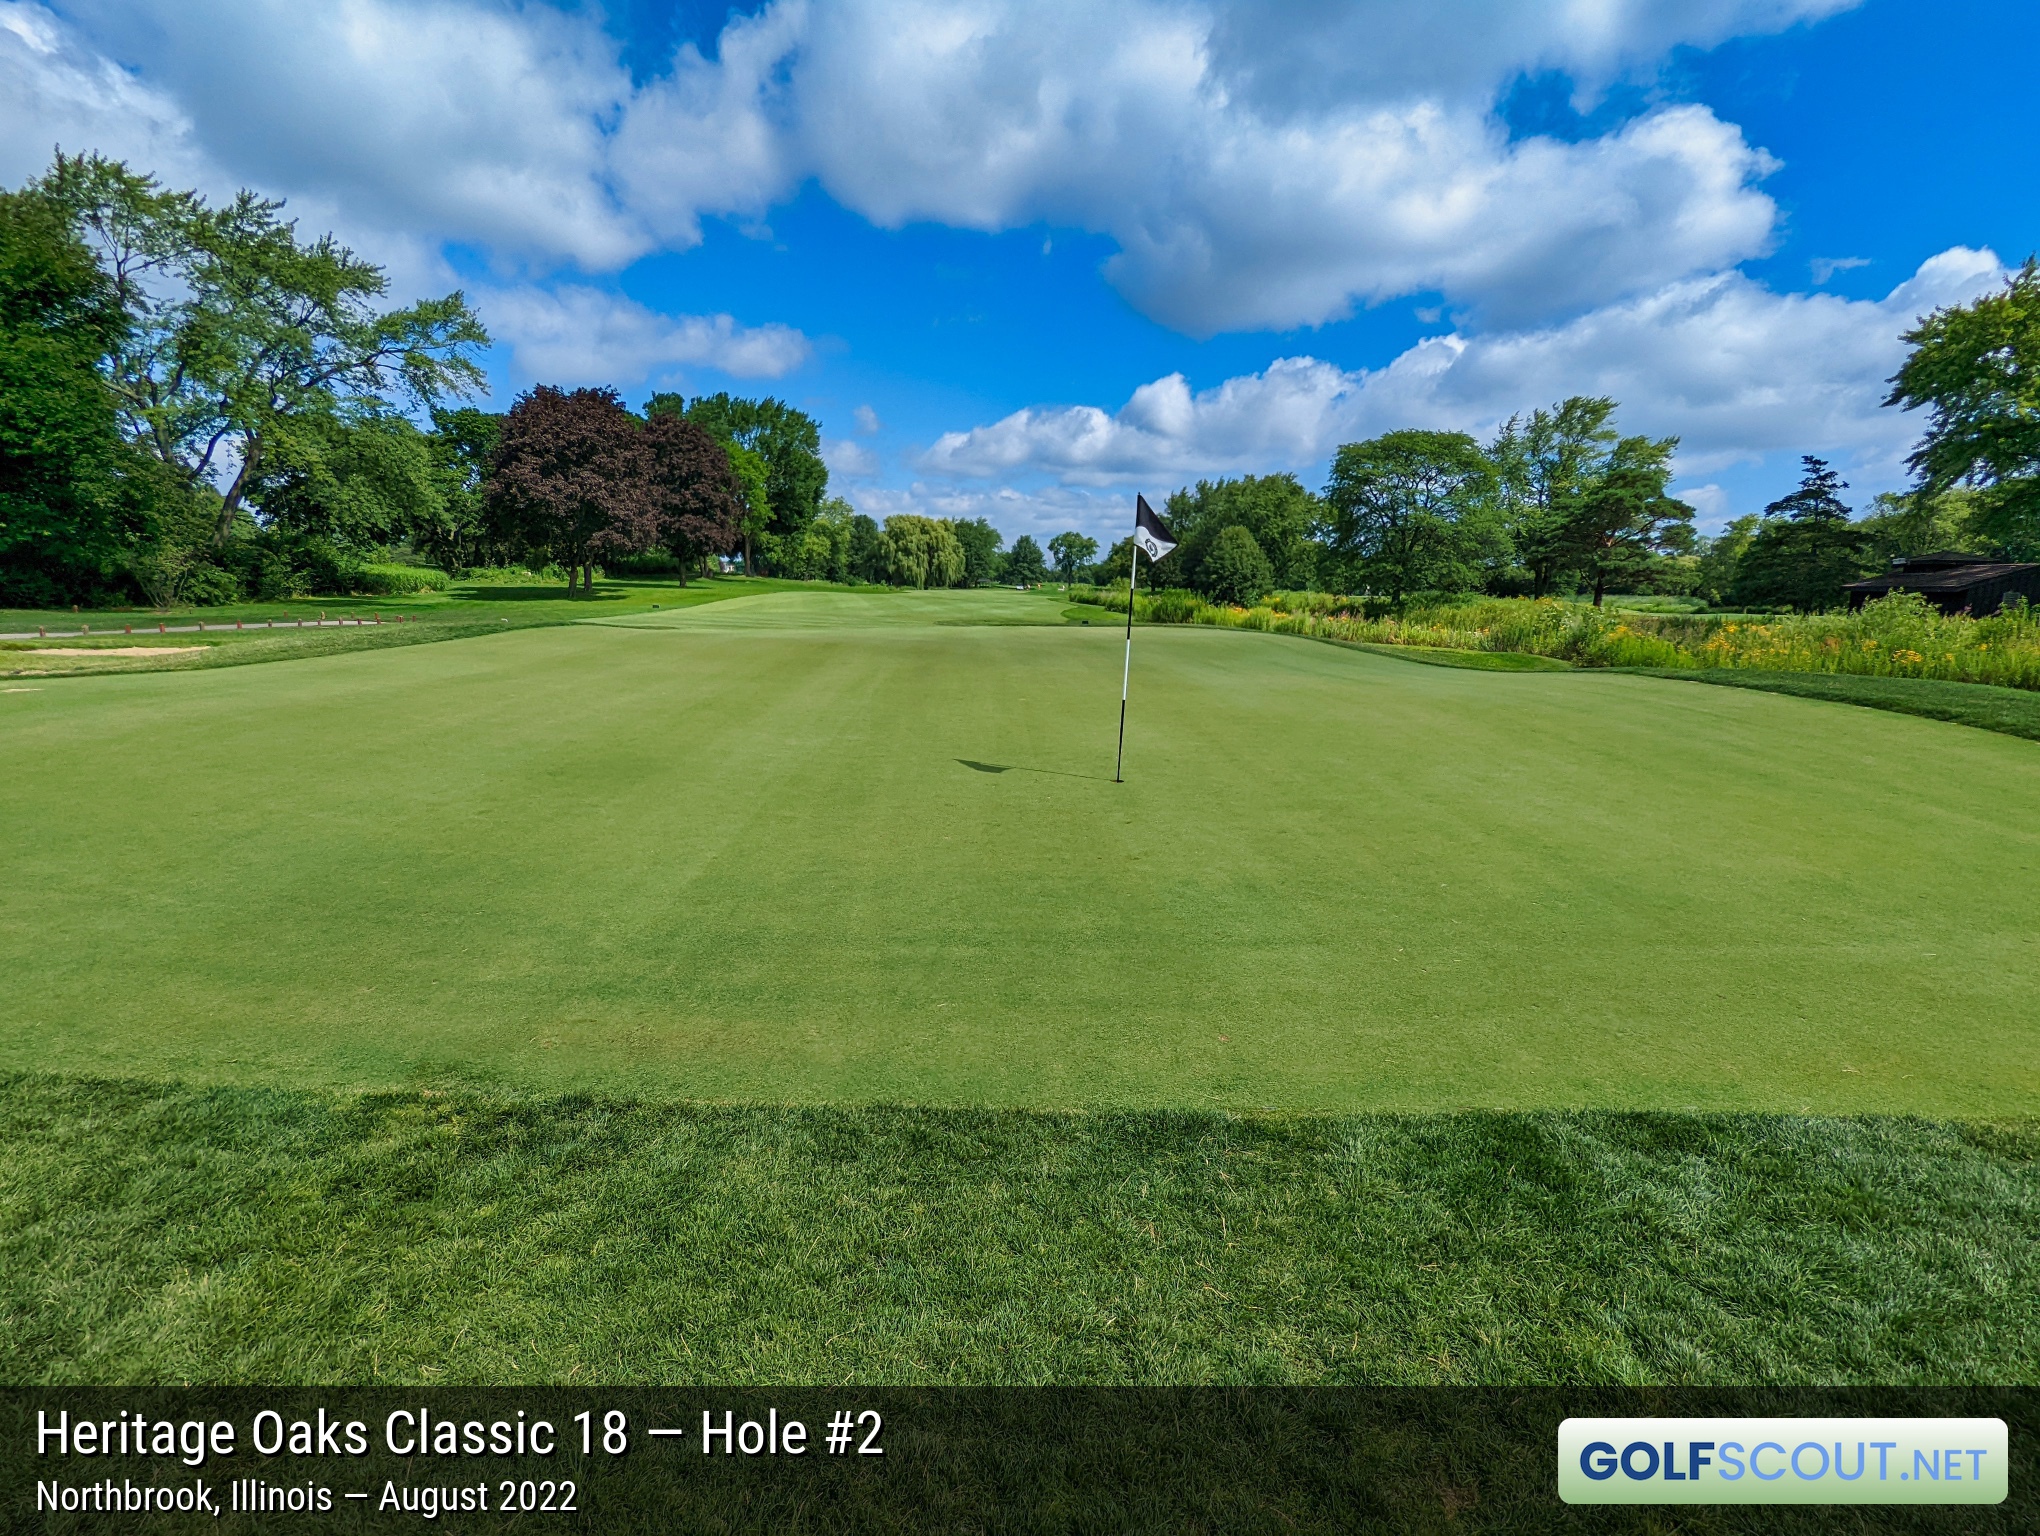 Photo of hole #2 at Heritage Oaks Golf Club - Classic 18 in Northbrook, Illinois. 